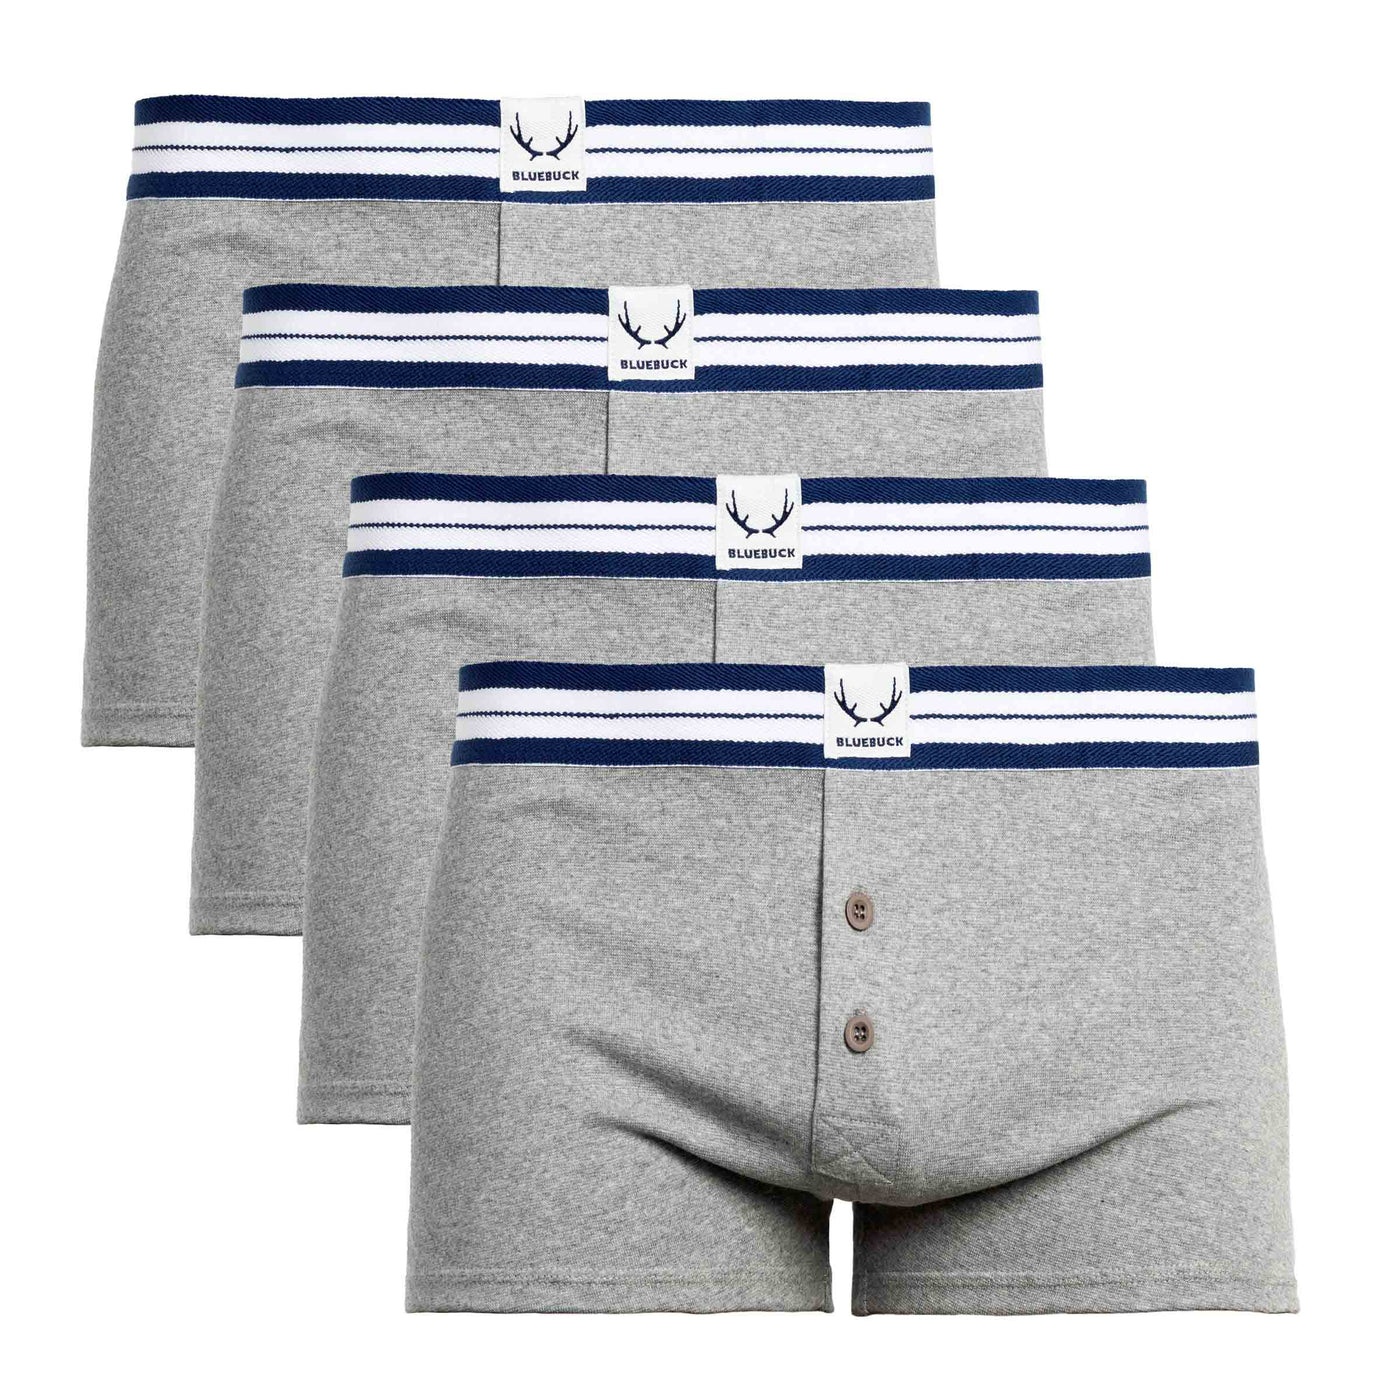 4 grey boxers in organic cotton for men